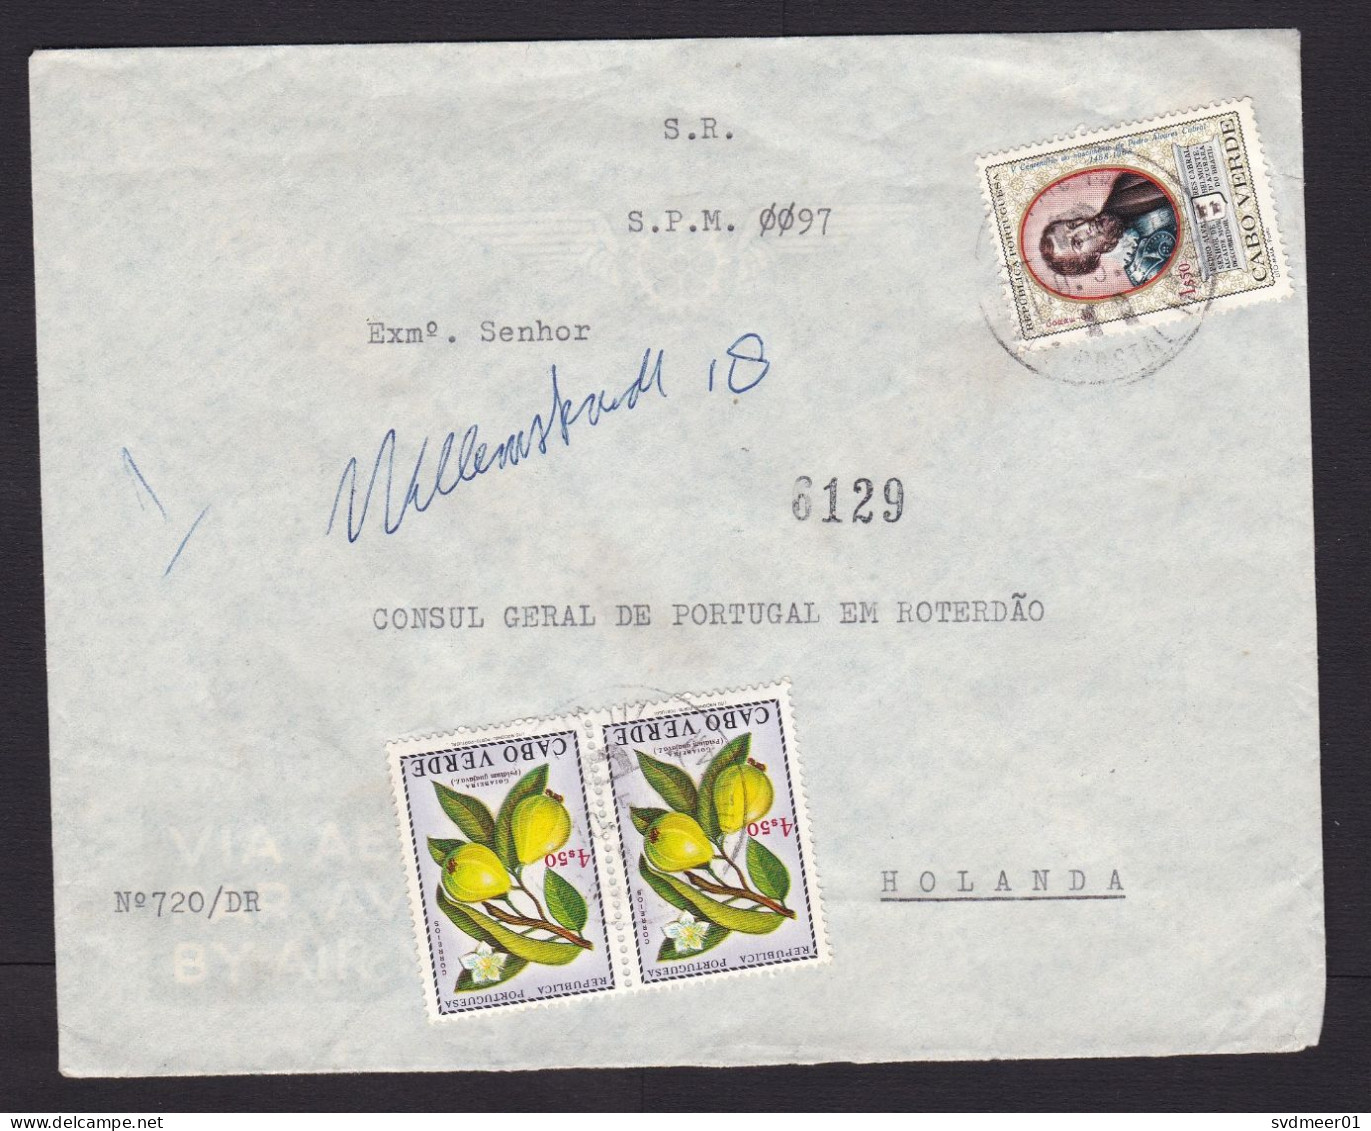 Cabo Verde: Cover To Netherlands, 1973, 3 Stamps, Fruit, History, To Consulate, No Address, Written Note (discolouring) - Kapverdische Inseln